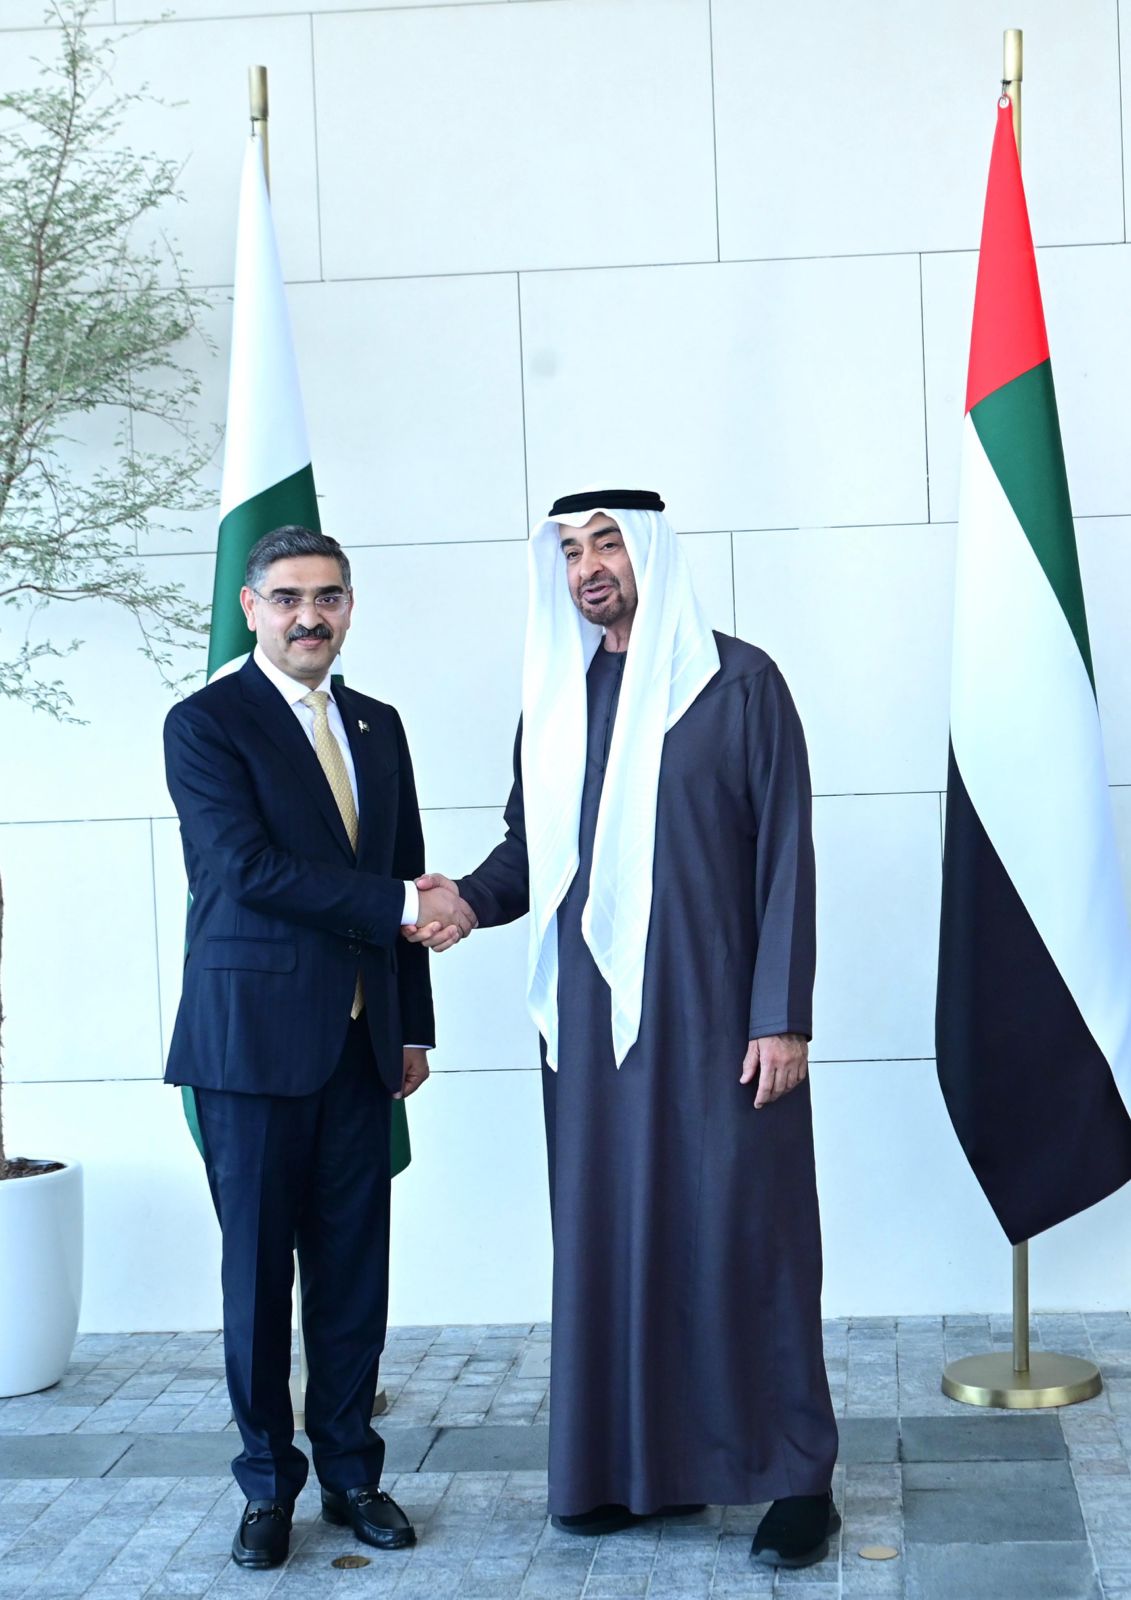 Meeting of the Caretaker Prime Minister with the President of the UAE.